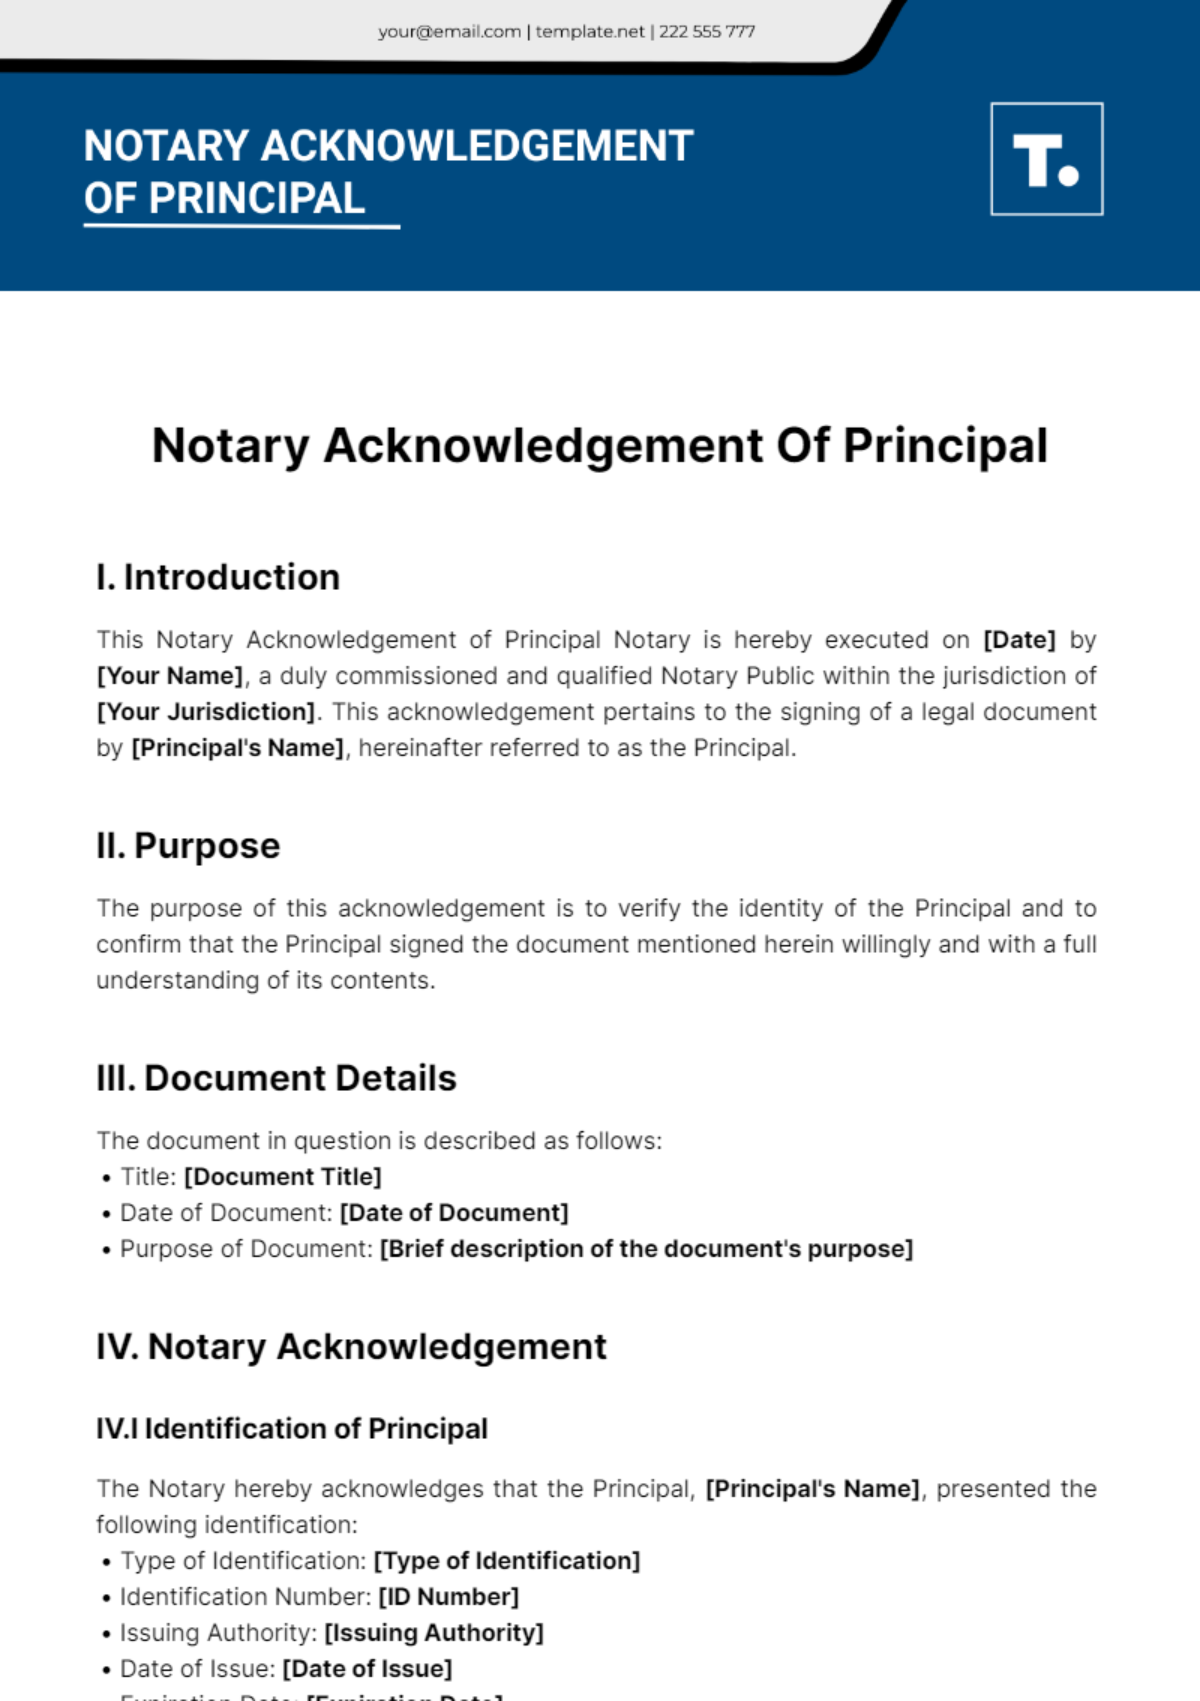 Free Notary Acknowledgement Of Principal Template